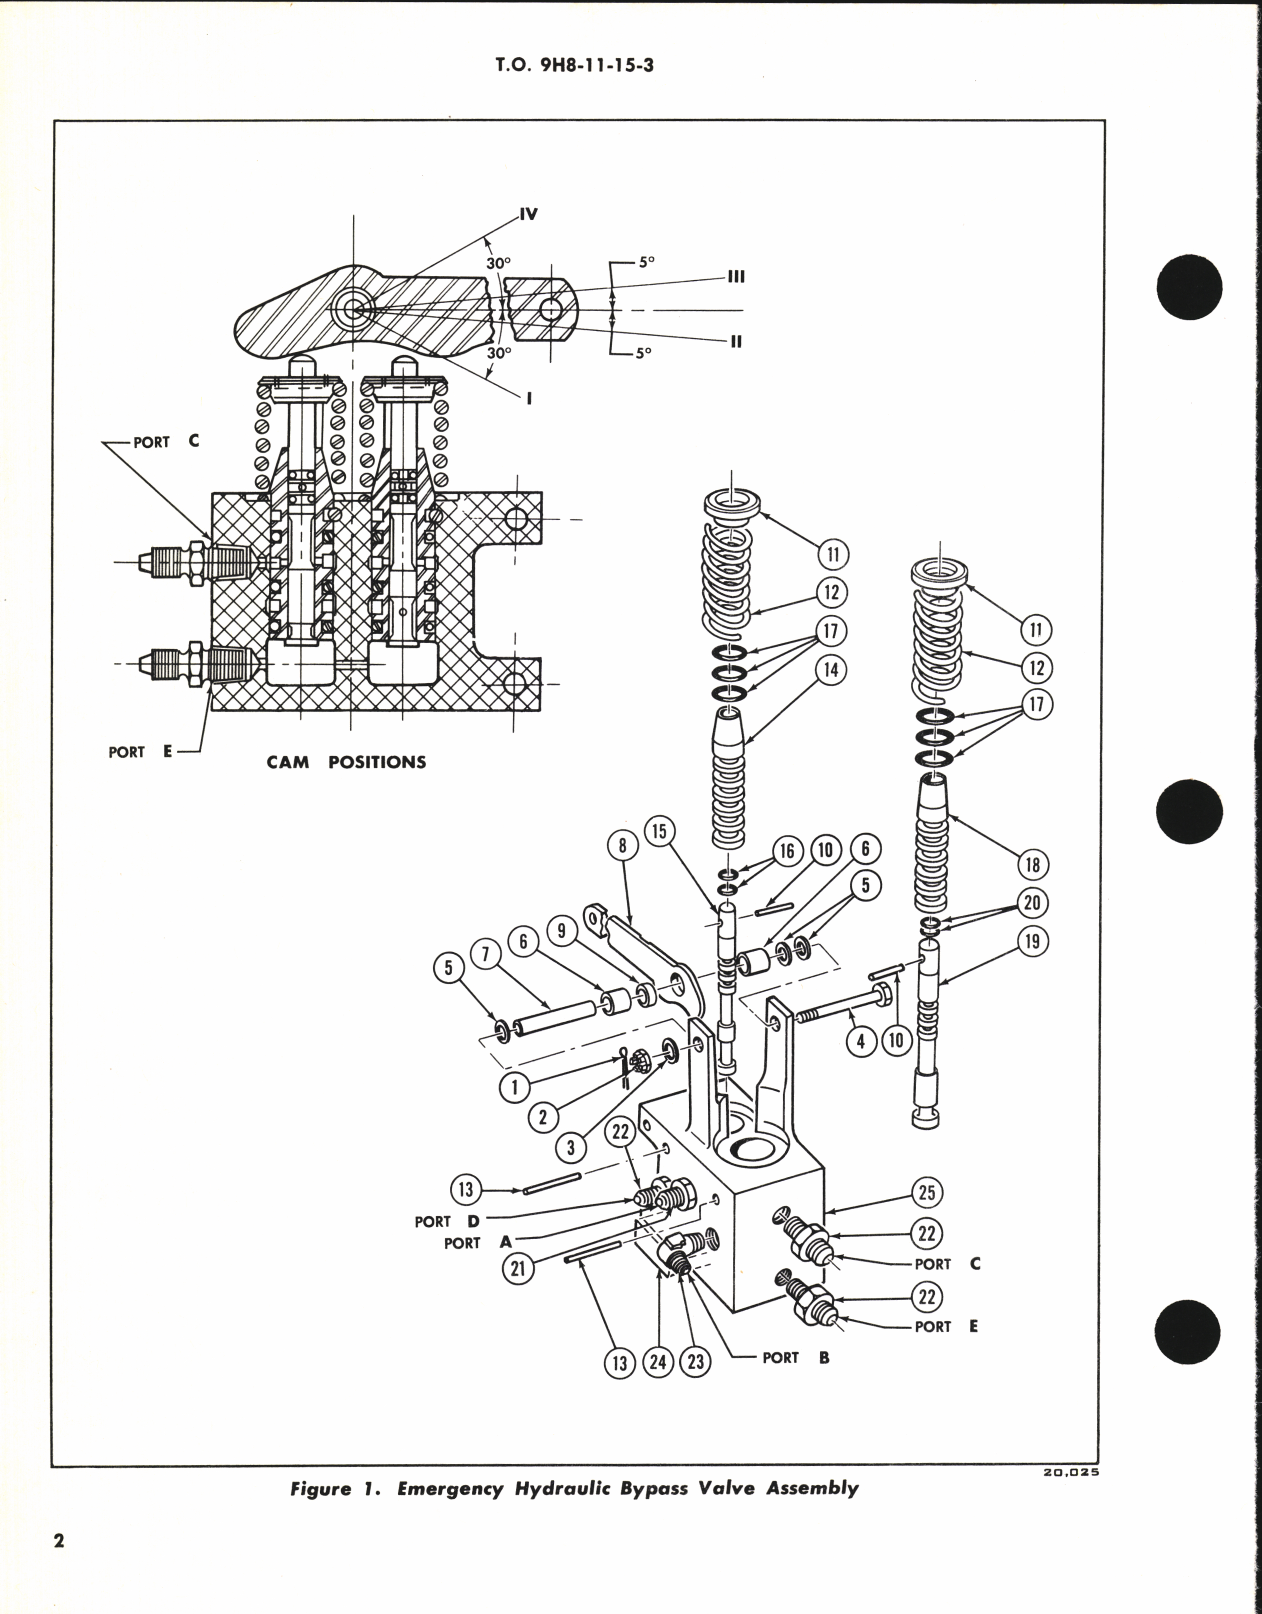 Sample page 2 from AirCorps Library document: Overhaul Instructions with Parts Breakdown for Valve Assembly, Emergency Hydraulic Bypass 4179894